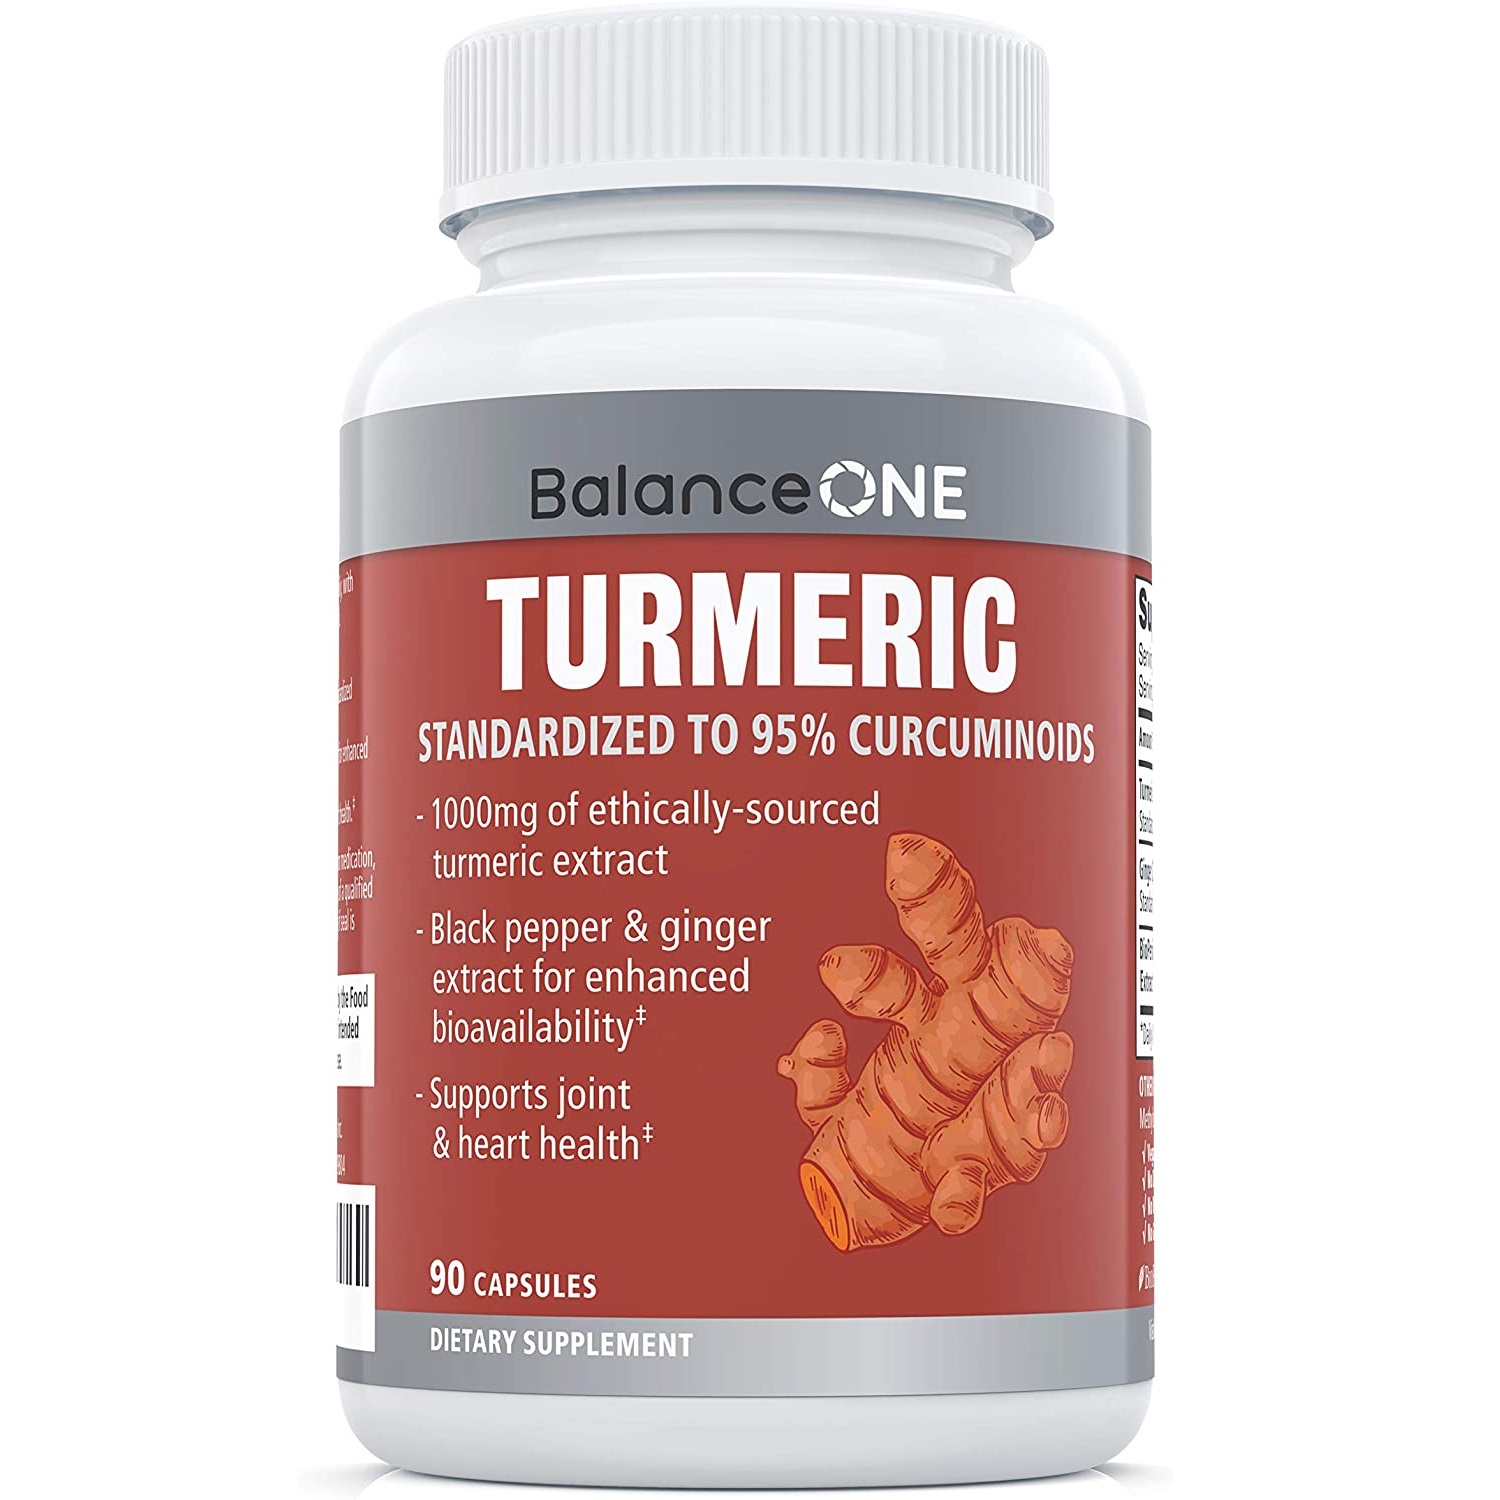 Balance ONE Turmeric 30-Day Supply ONLY $8.78 at Amazon (reg. $21.97; SAVE 60%)